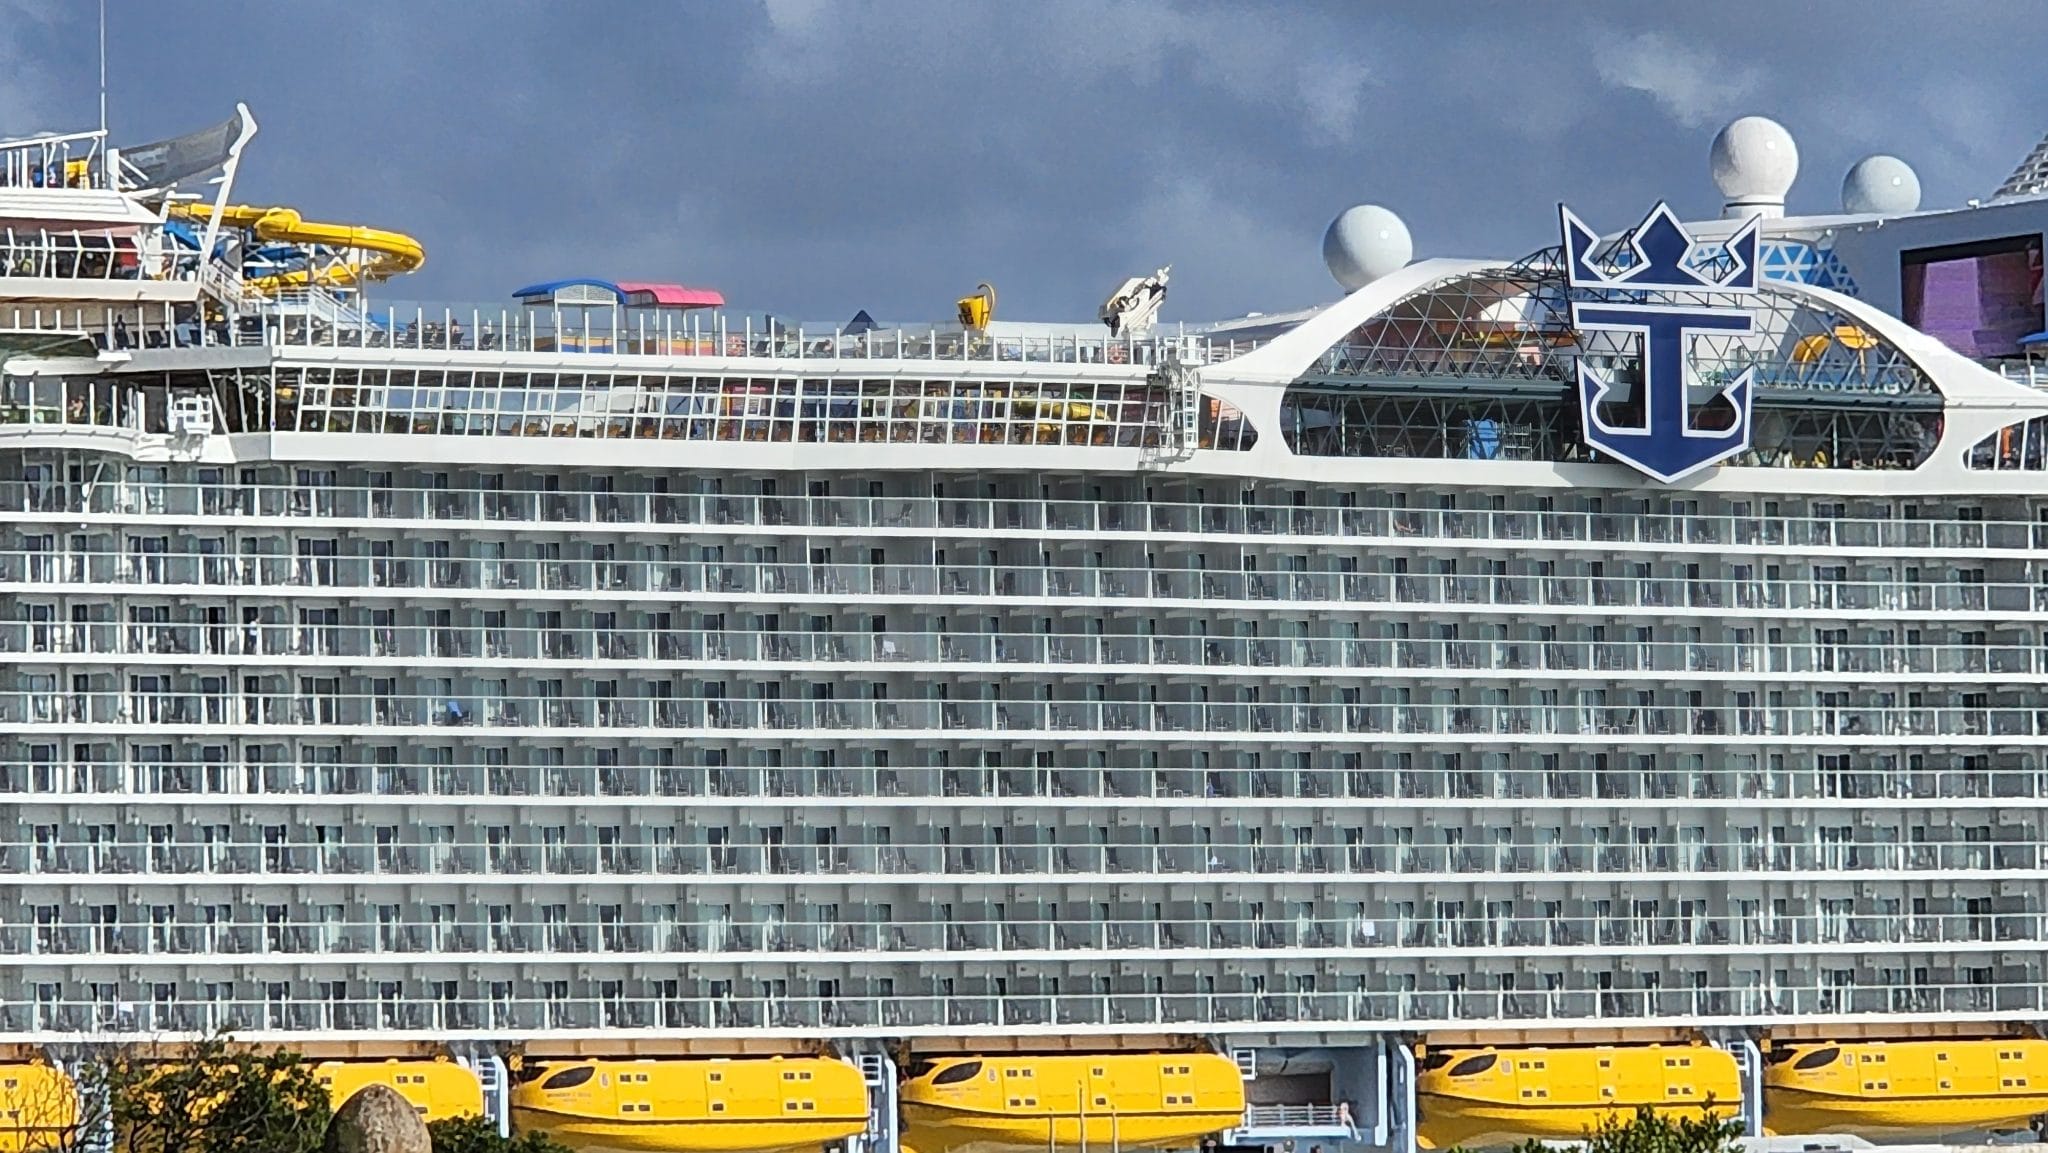 Largest Cruise Ship Ever Has First Block Laid At Shipyard